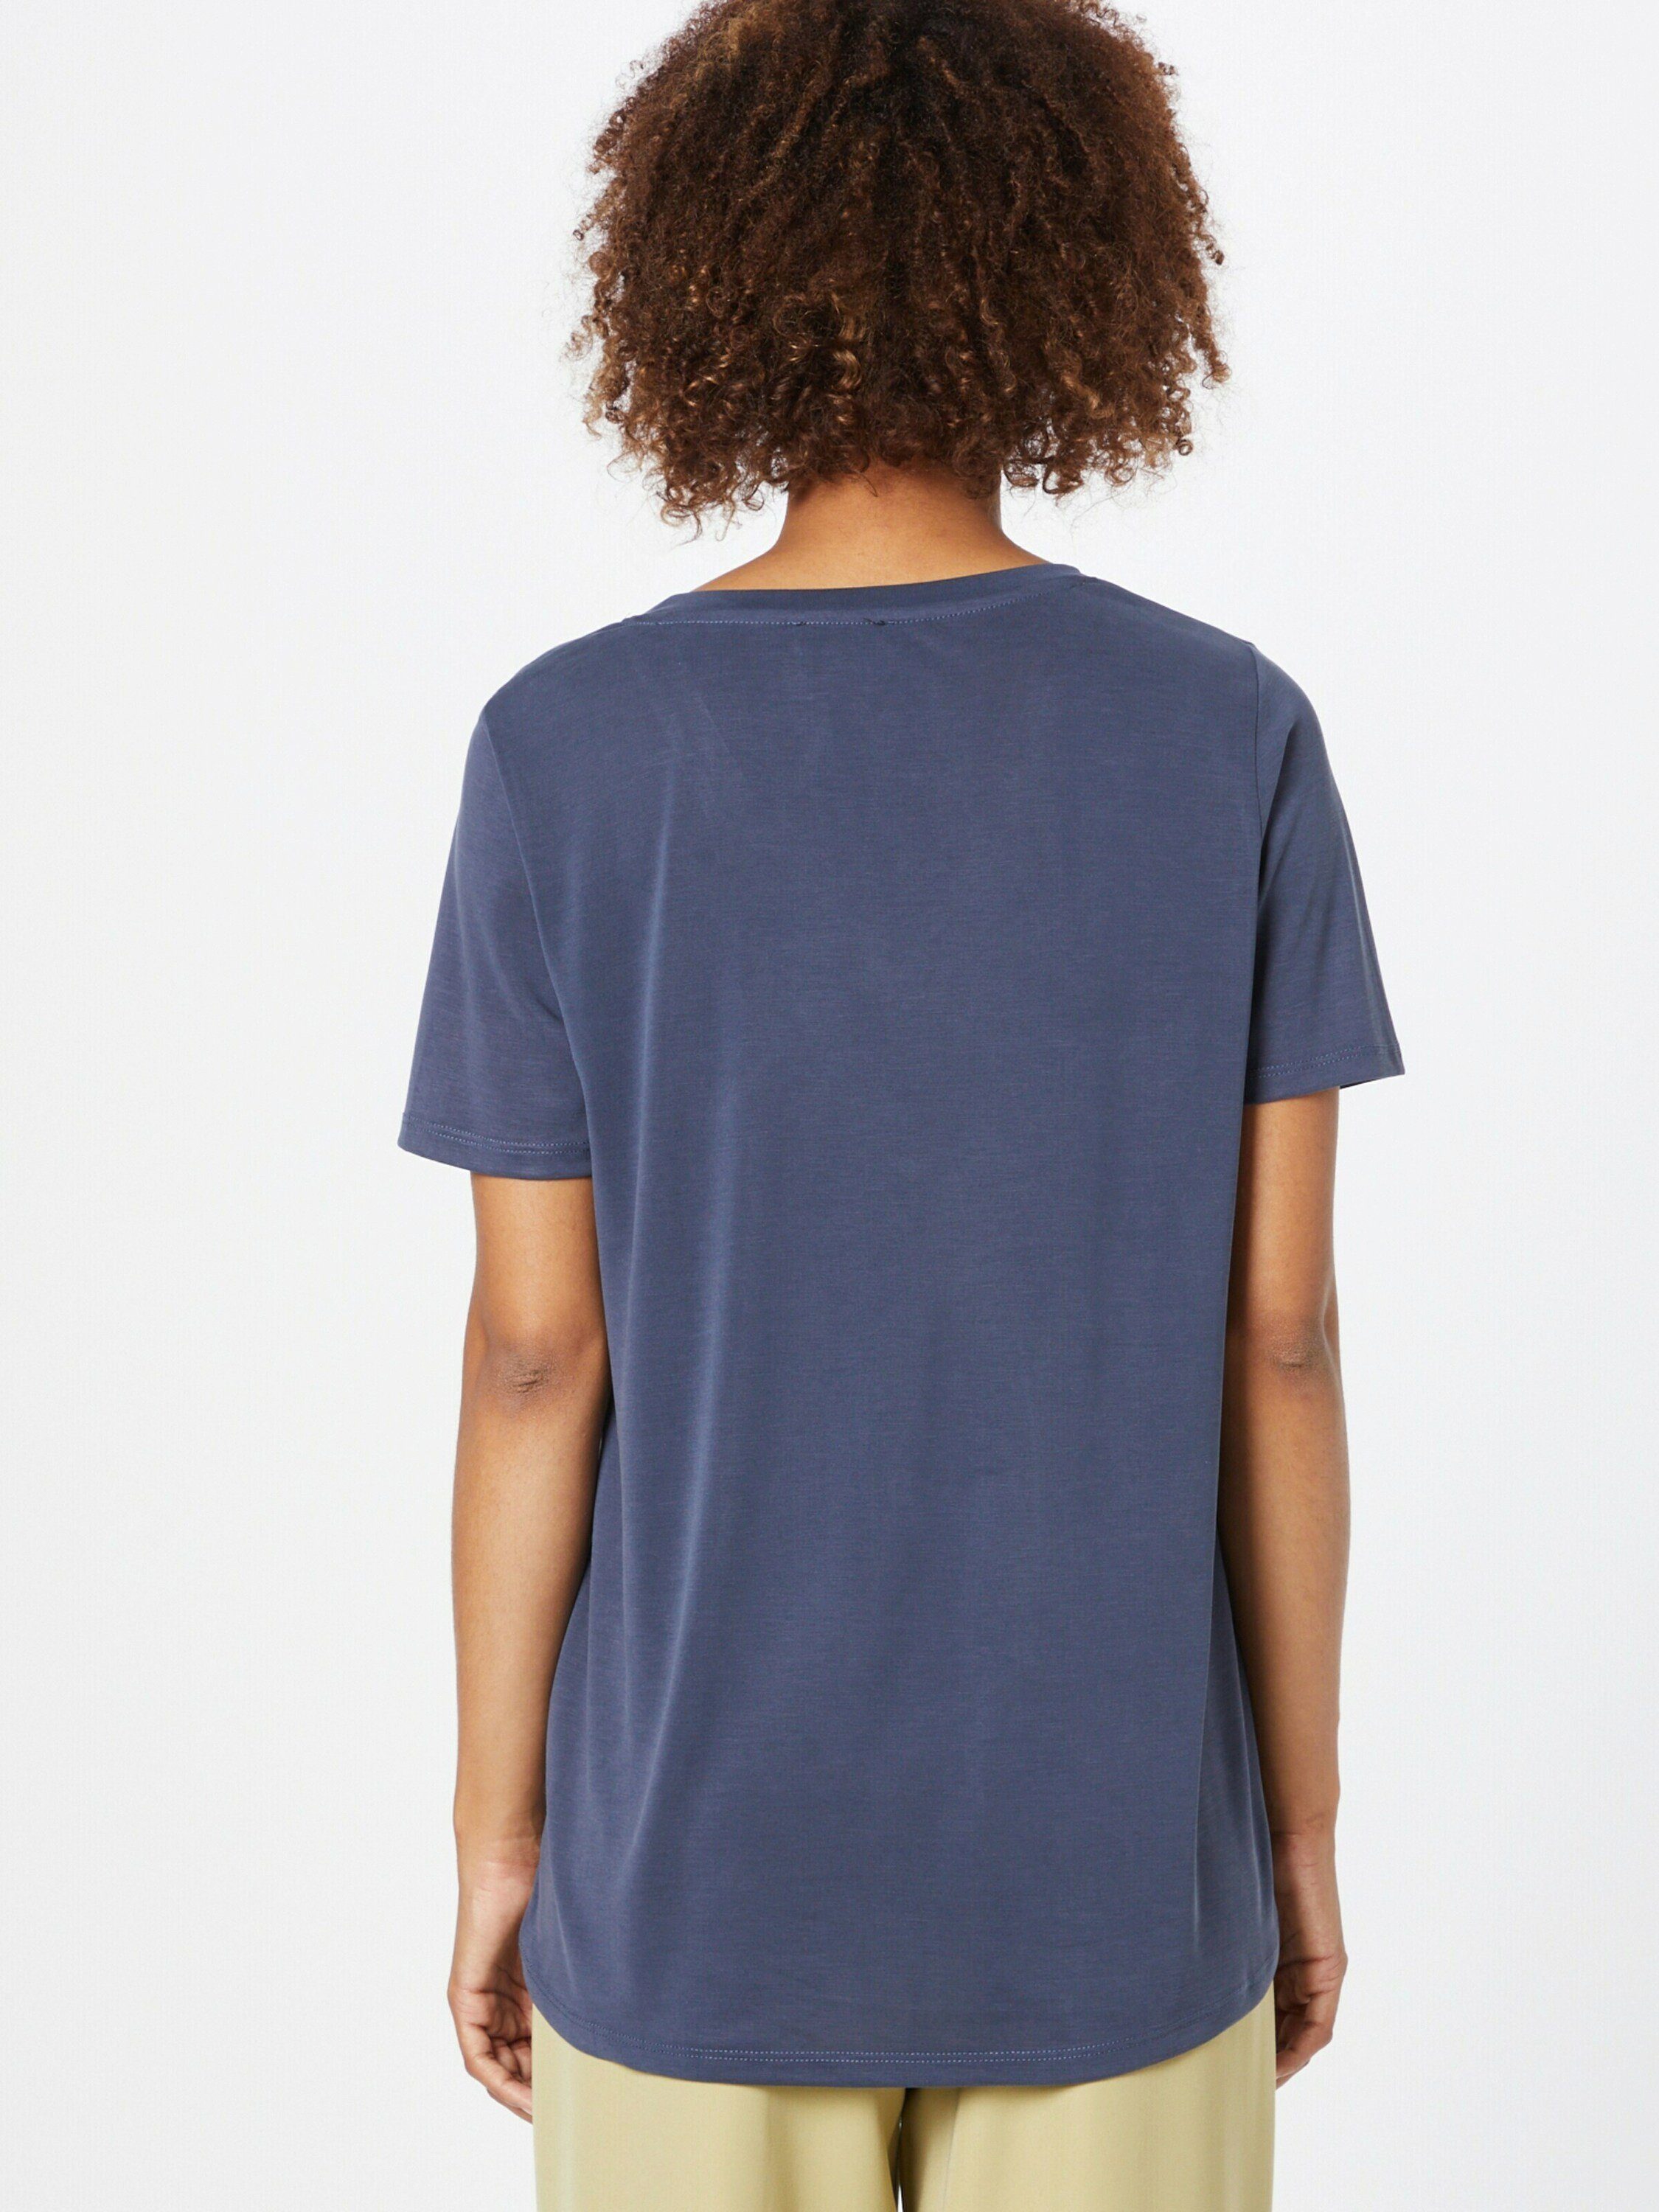 IN SOAKED LUXURY Plain/ohne Columbine T-Shirt Details (1-tlg)